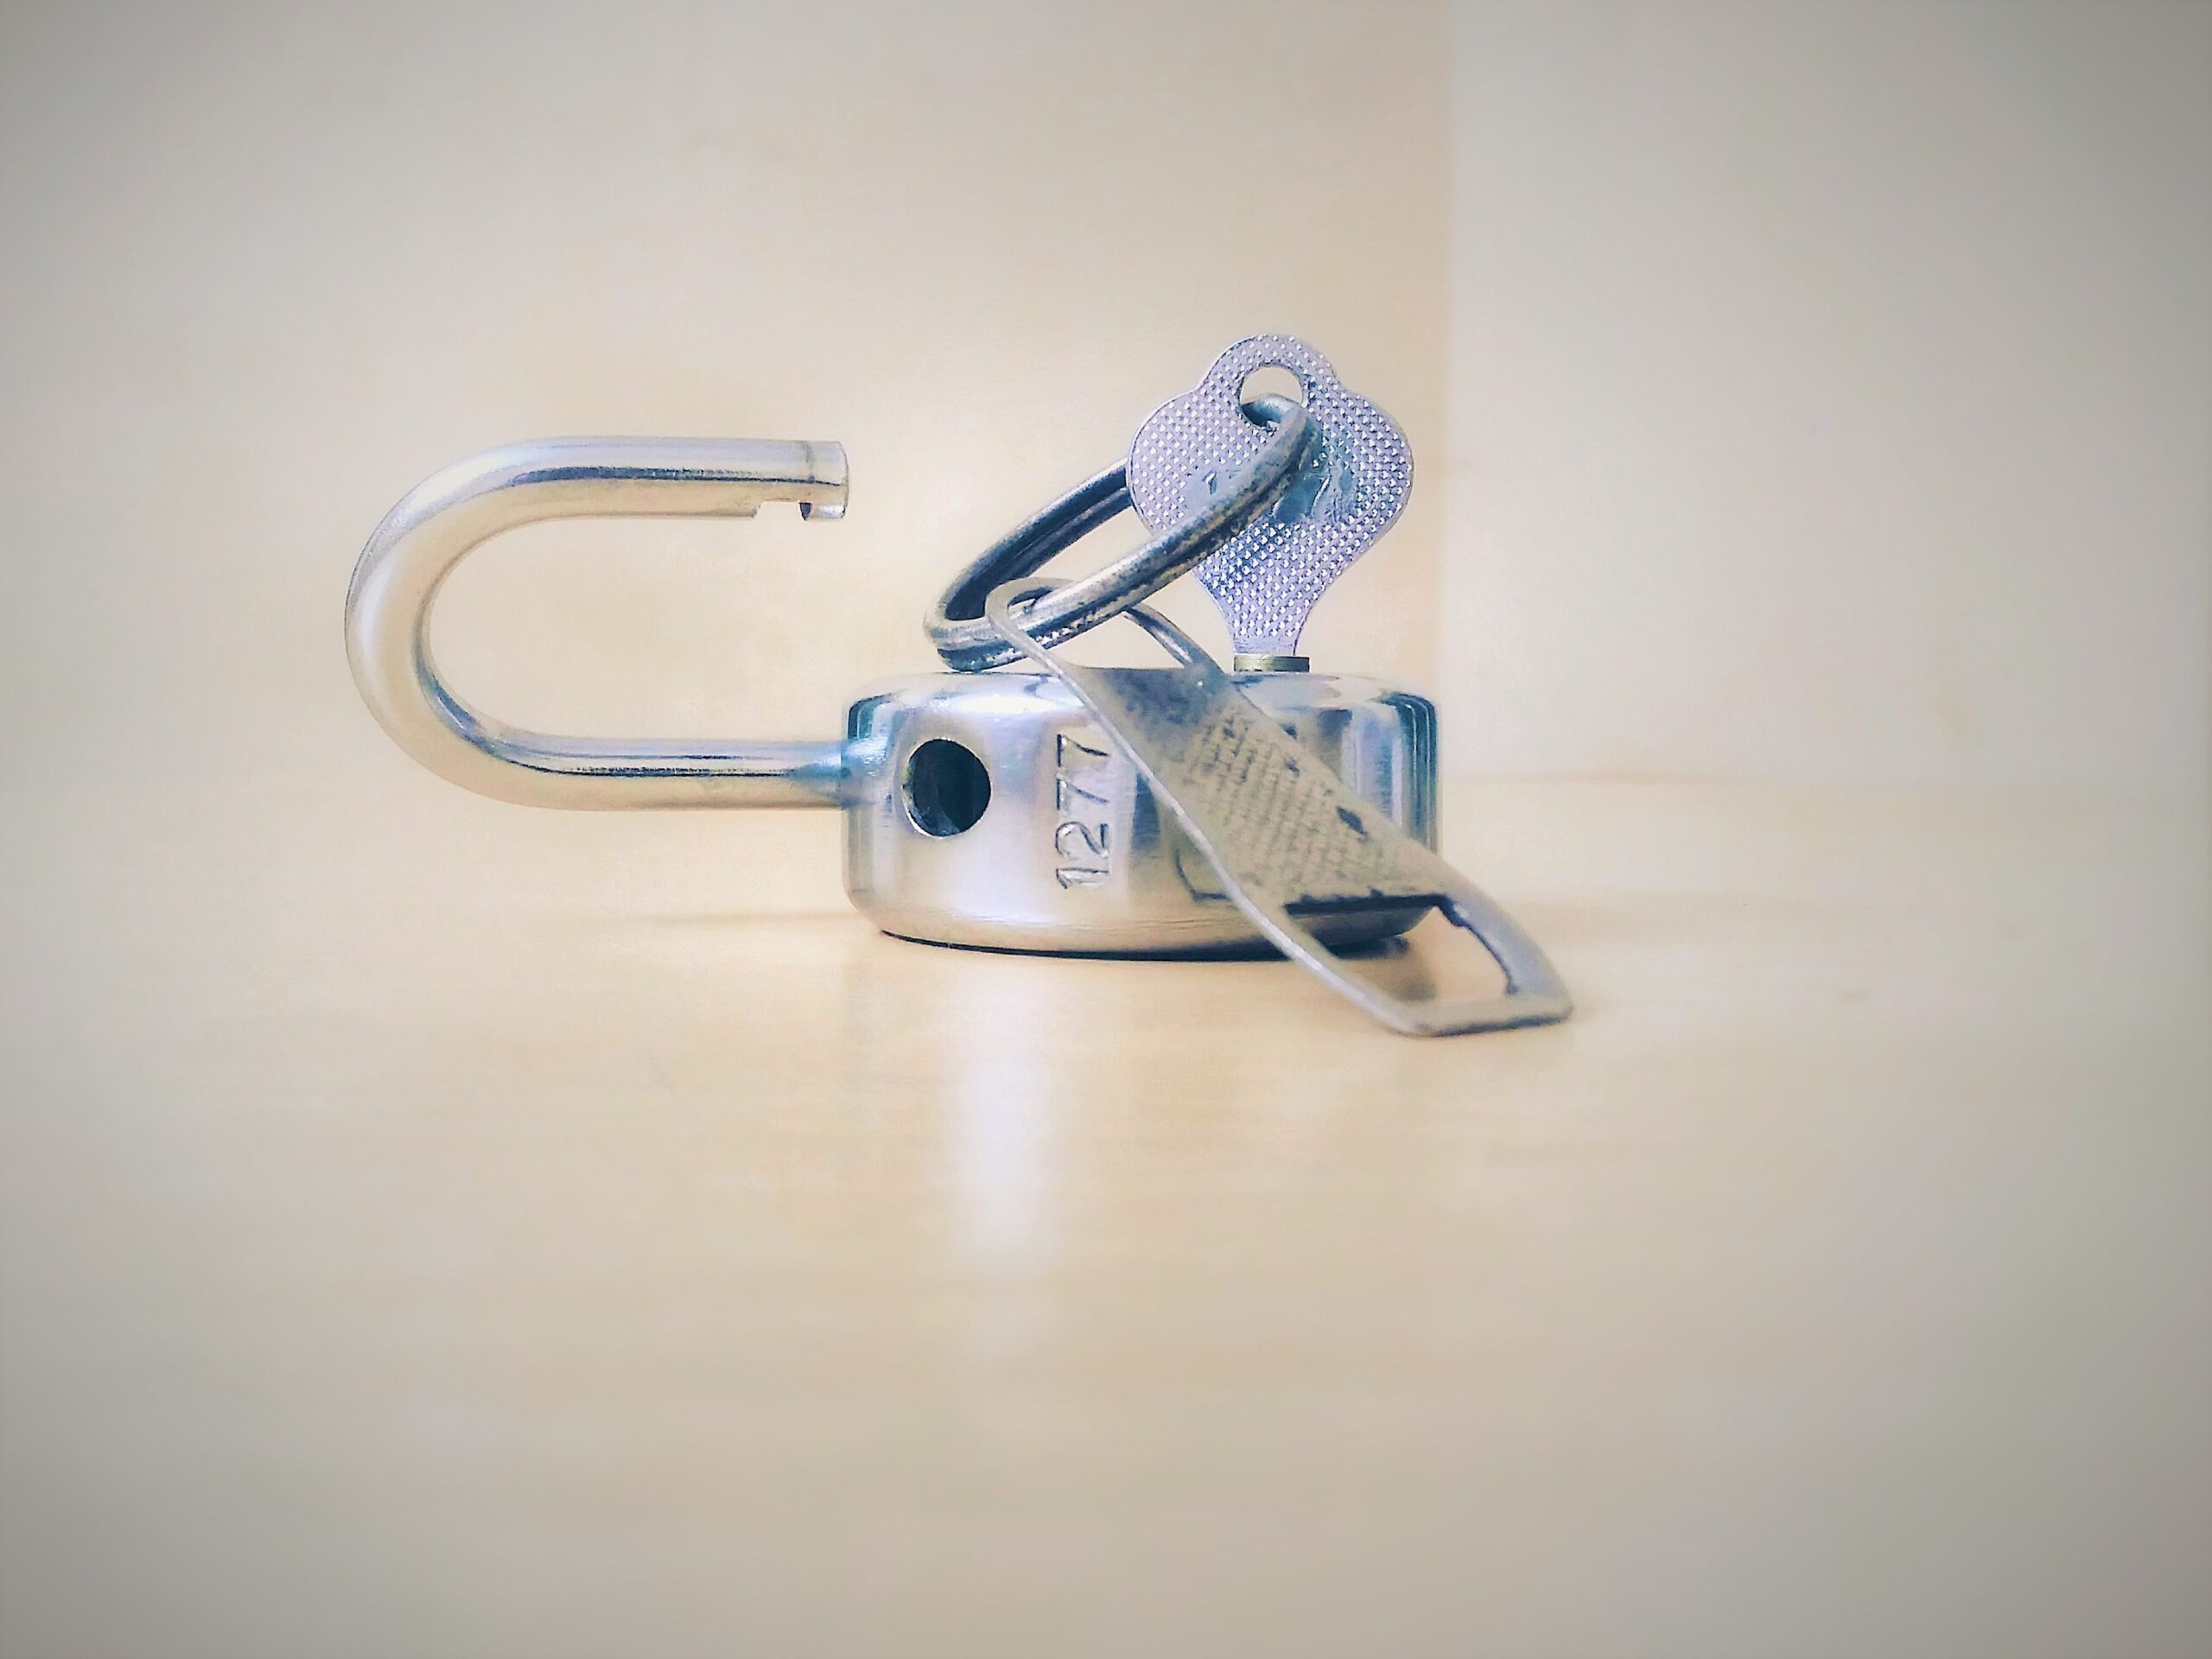 padlock & key indicating freedom from unwanted habits such as procrastination, emotional eating, weight control, stress etc.